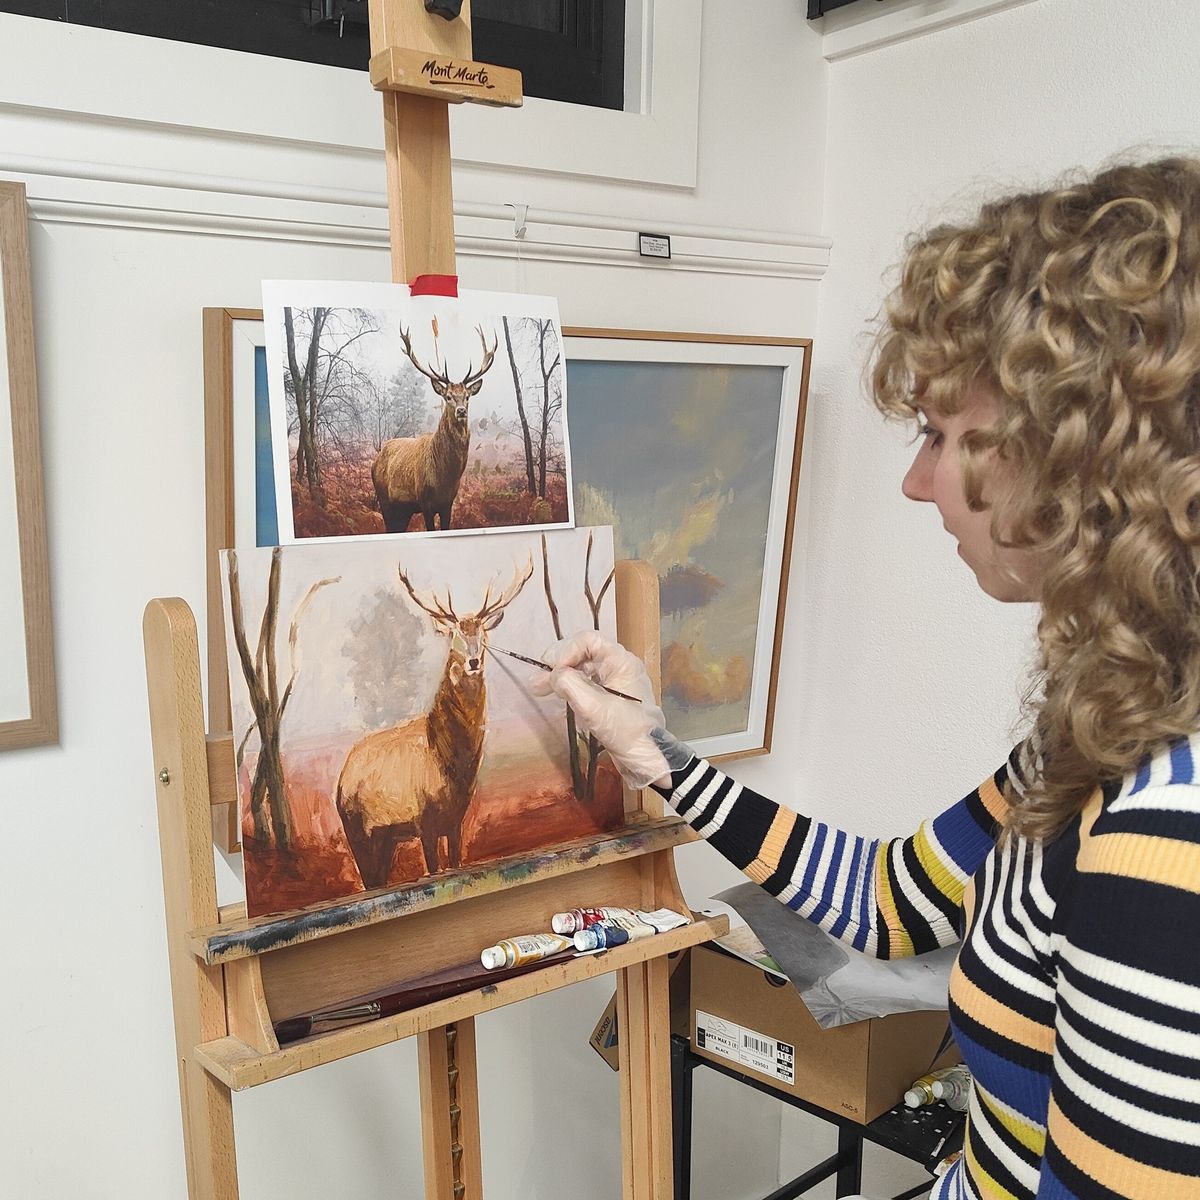 Monday Night Painting in Oils with David Kemp